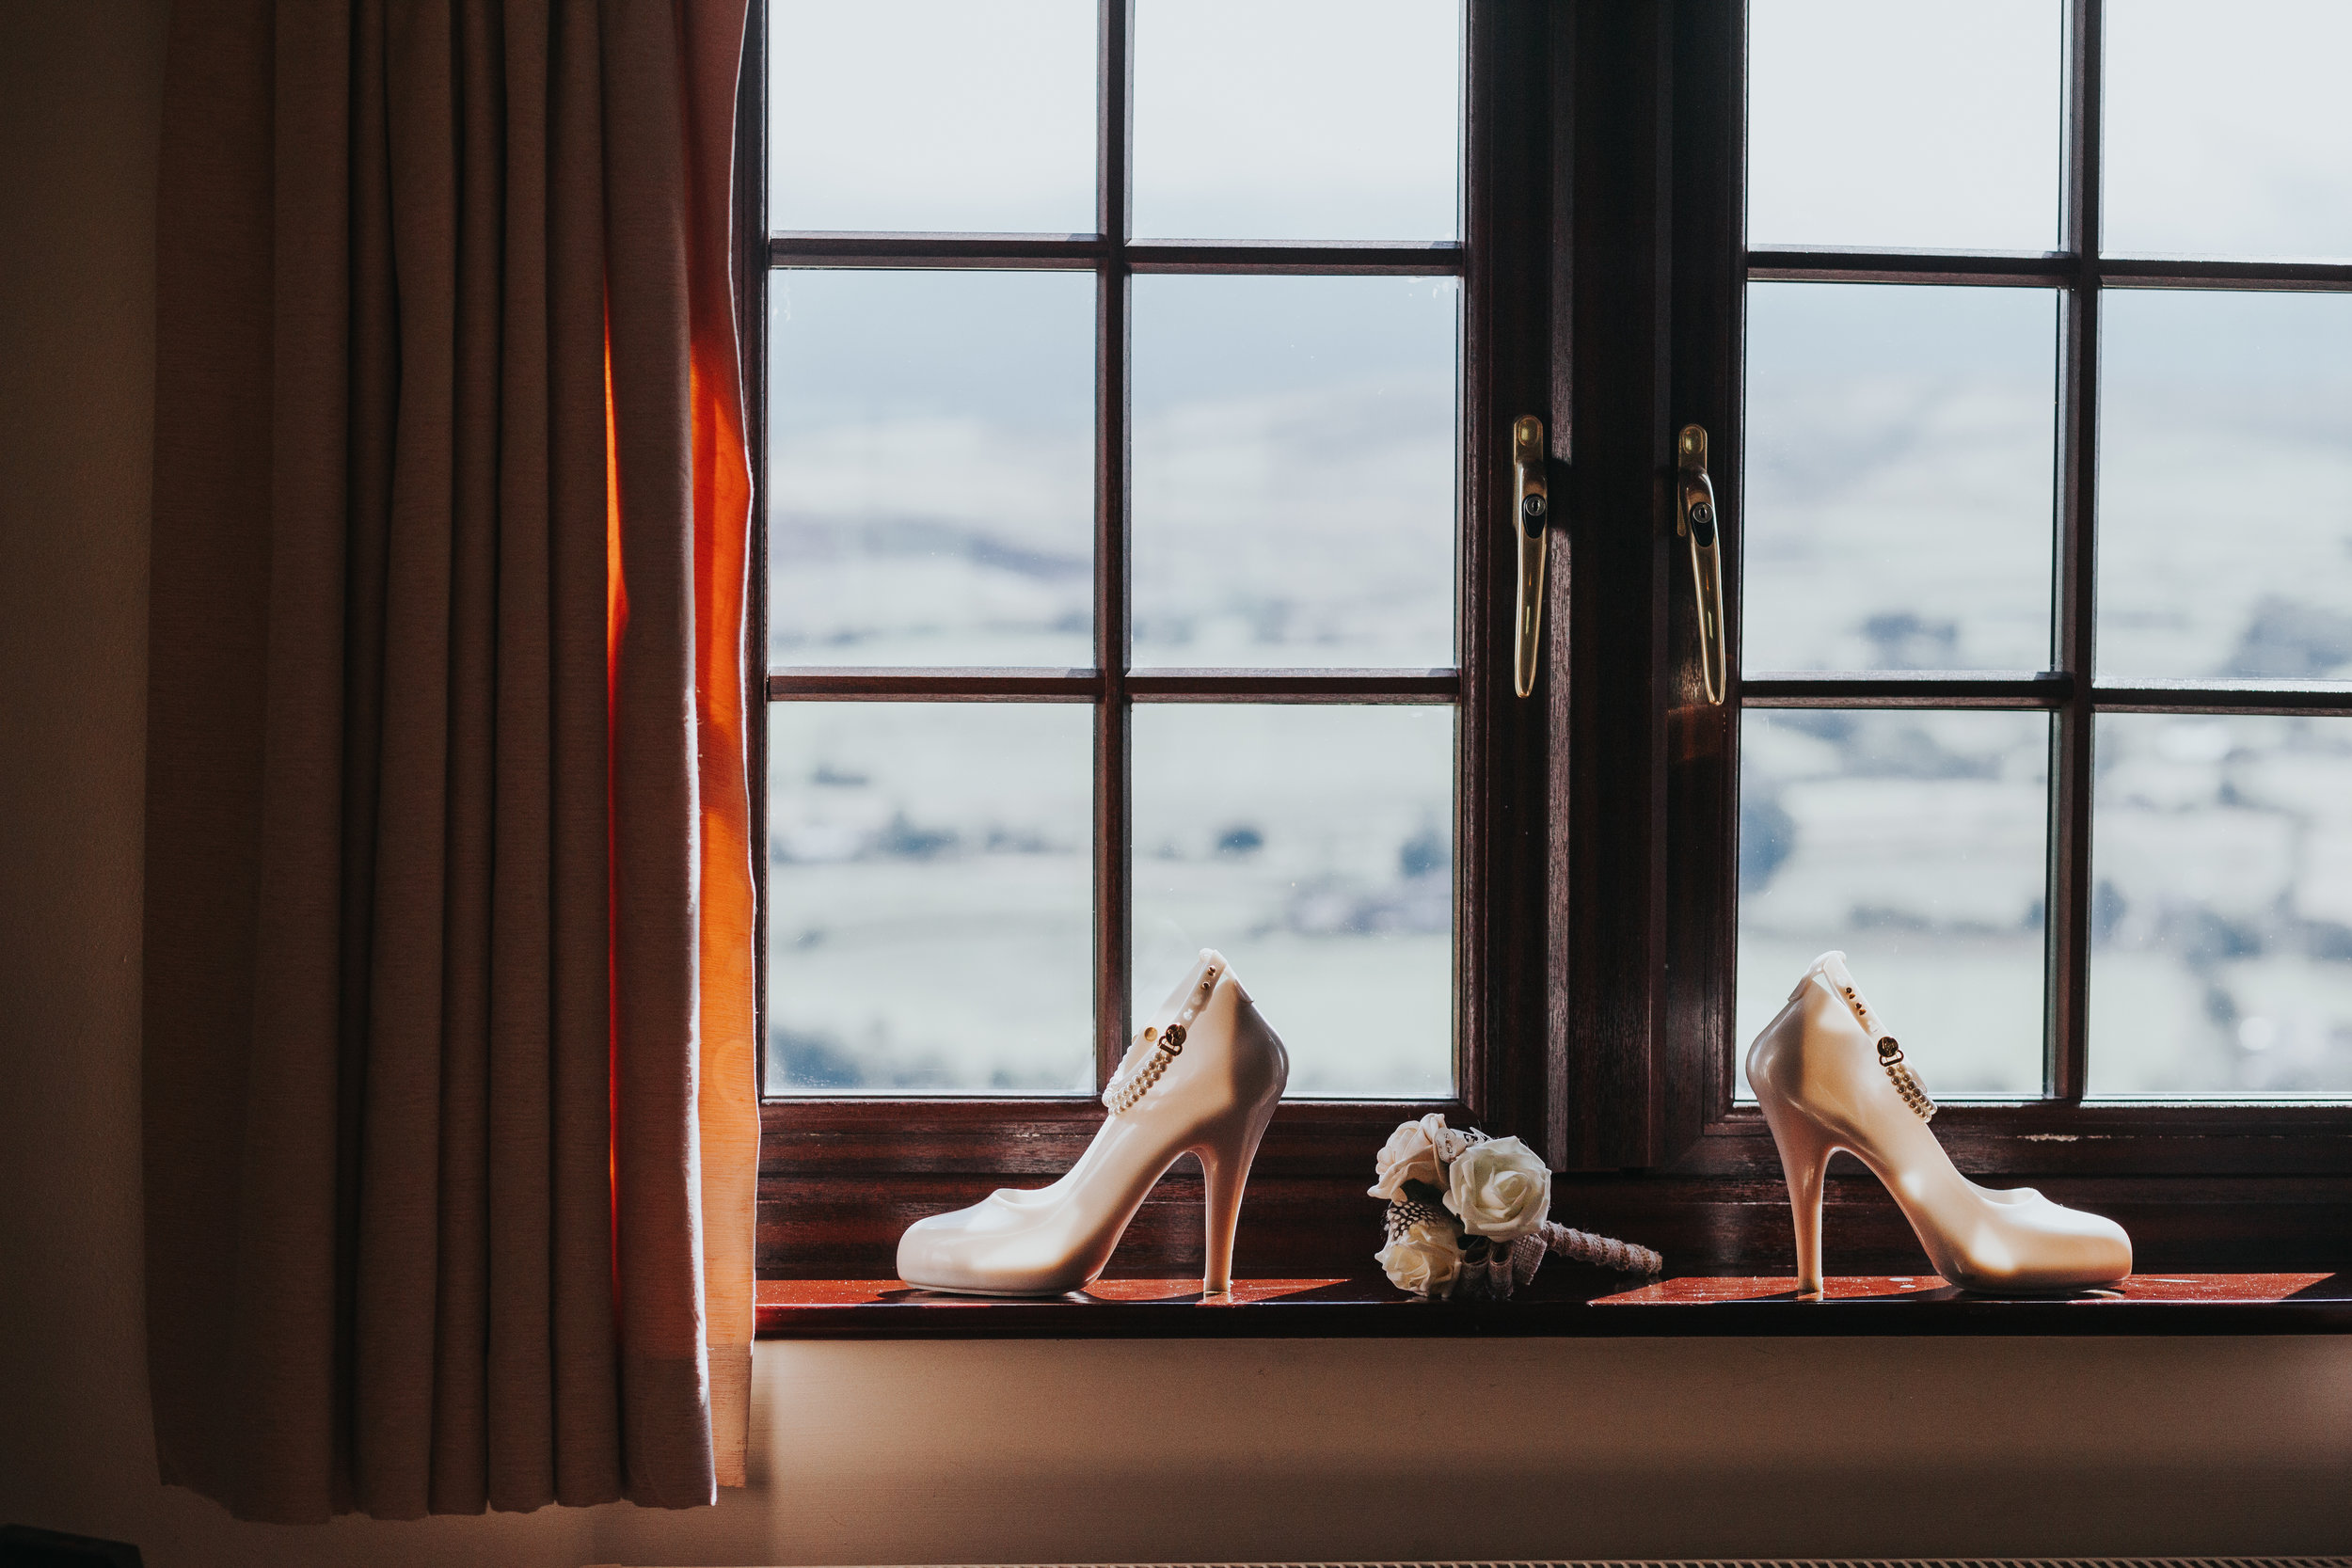  Brides jelly heeled shoes in hotel window, the light coming through them makes them light up like glass slippers, accompanied by chipper child's hand made paper flowers. (Chipper child didn't make them, a professional did) 